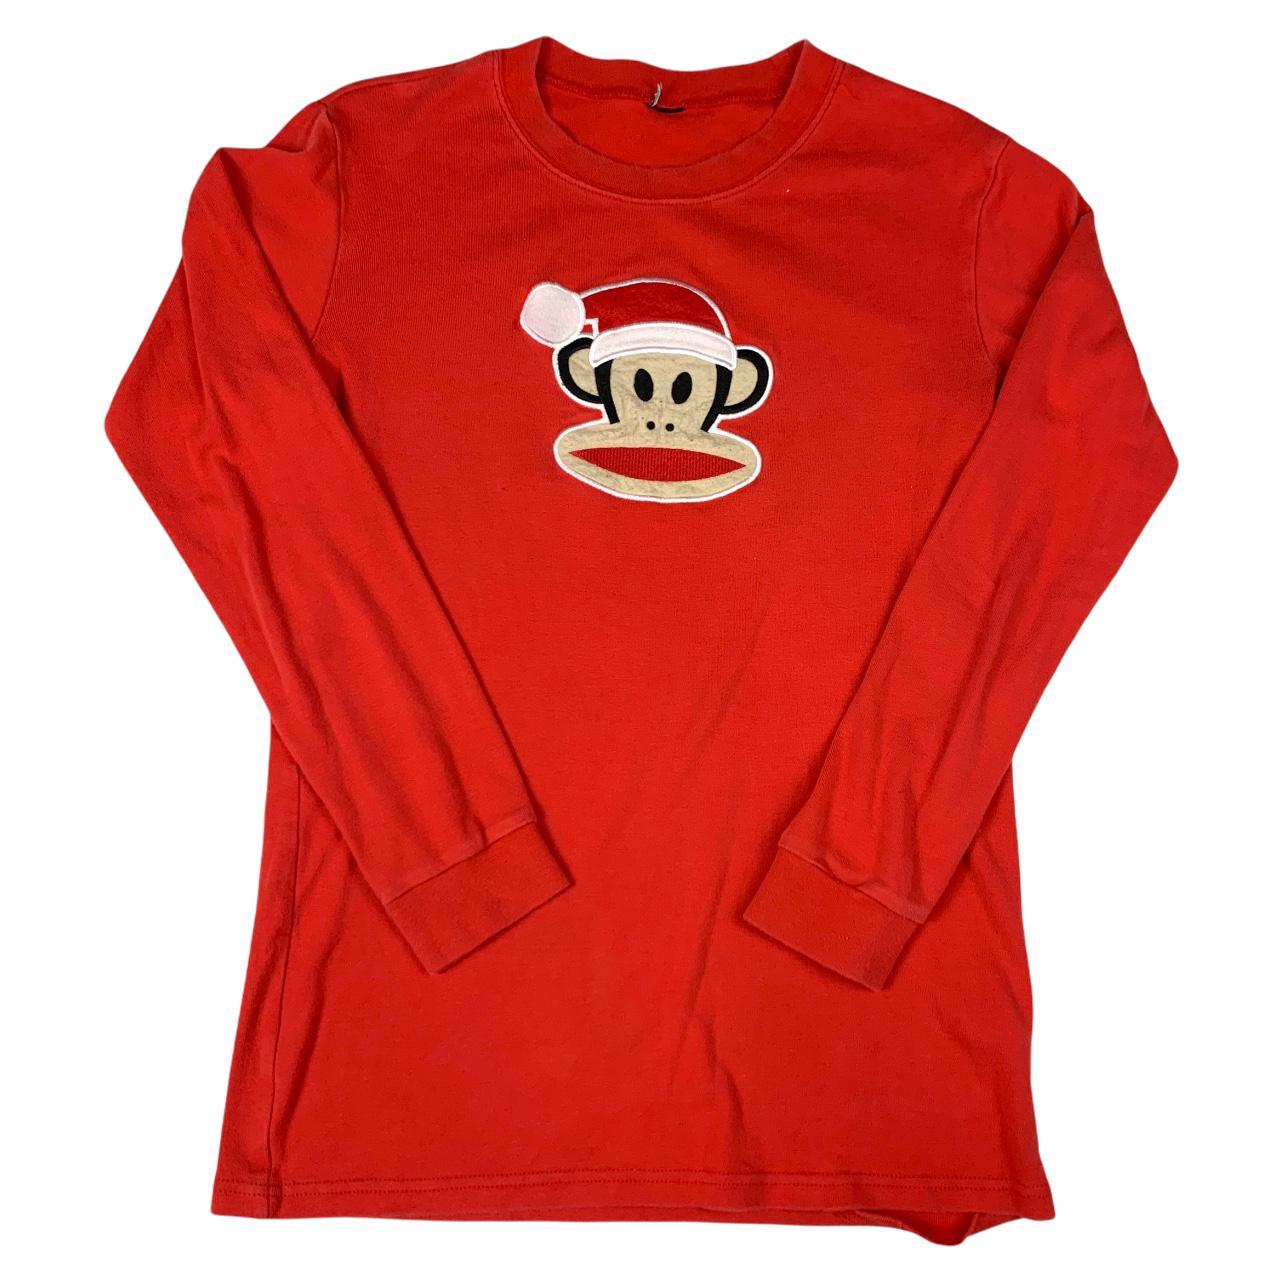 Paul Frank Women's Red and Black T-shirt